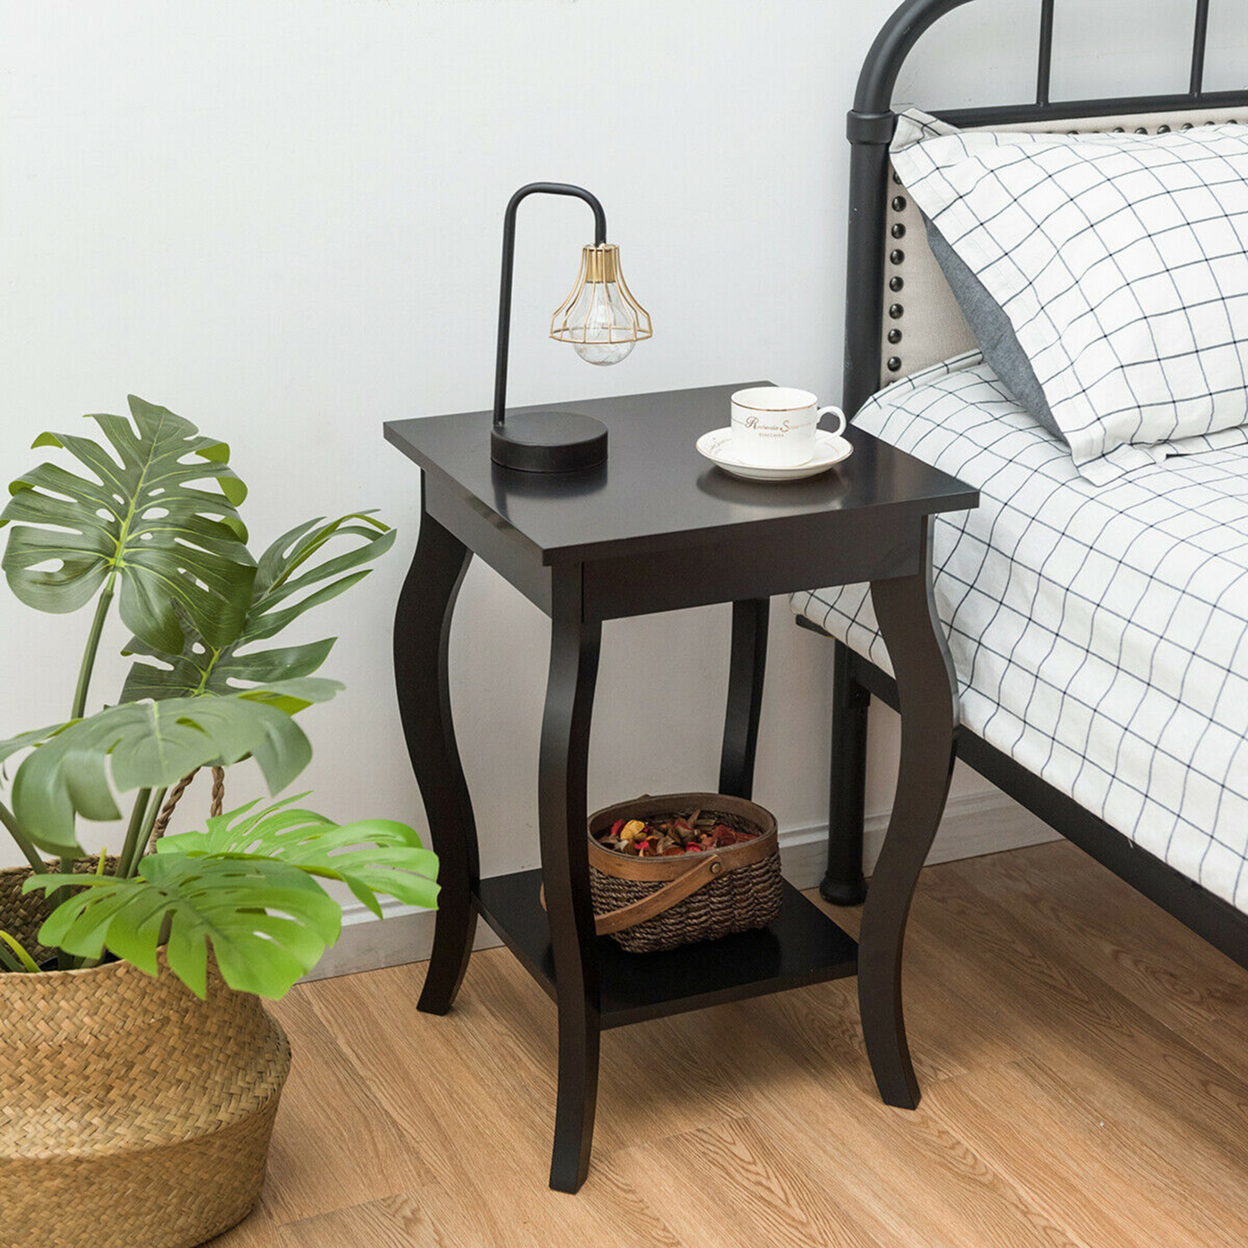 Set Of 2 Accent Side Table Sofa End Table Nightstand Coffee Table W/ Shelf Brown